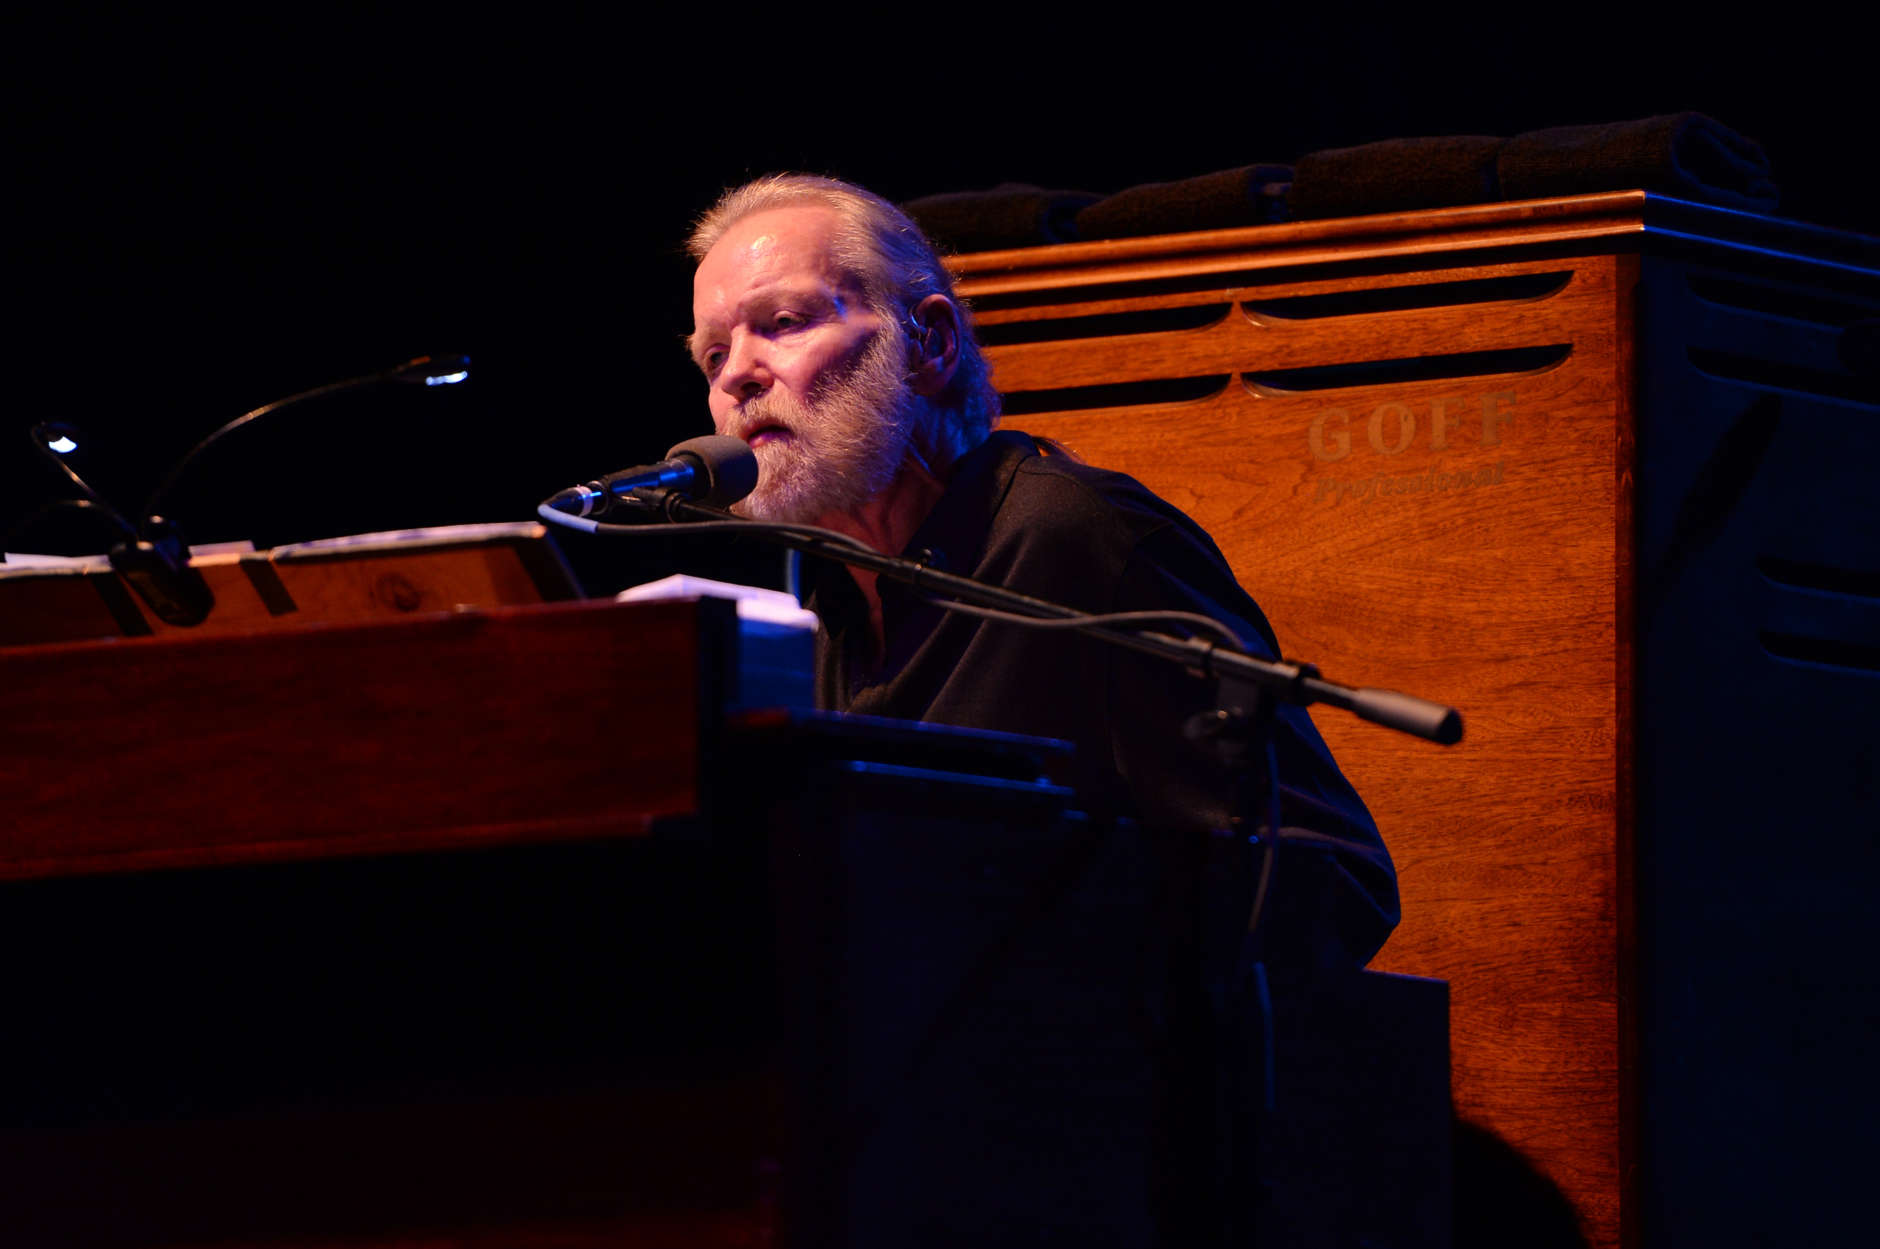 Music legend Gregg Allman performs at Hard Rock Live! in the Seminole Hard Rock Hotel &amp; Casino on January 4, 2015 in Hollywood, Florida. Allman, organist and singer for The Allman Brothers Band, died Saturday. (Photo by Jeff Daly/Invision/AP)